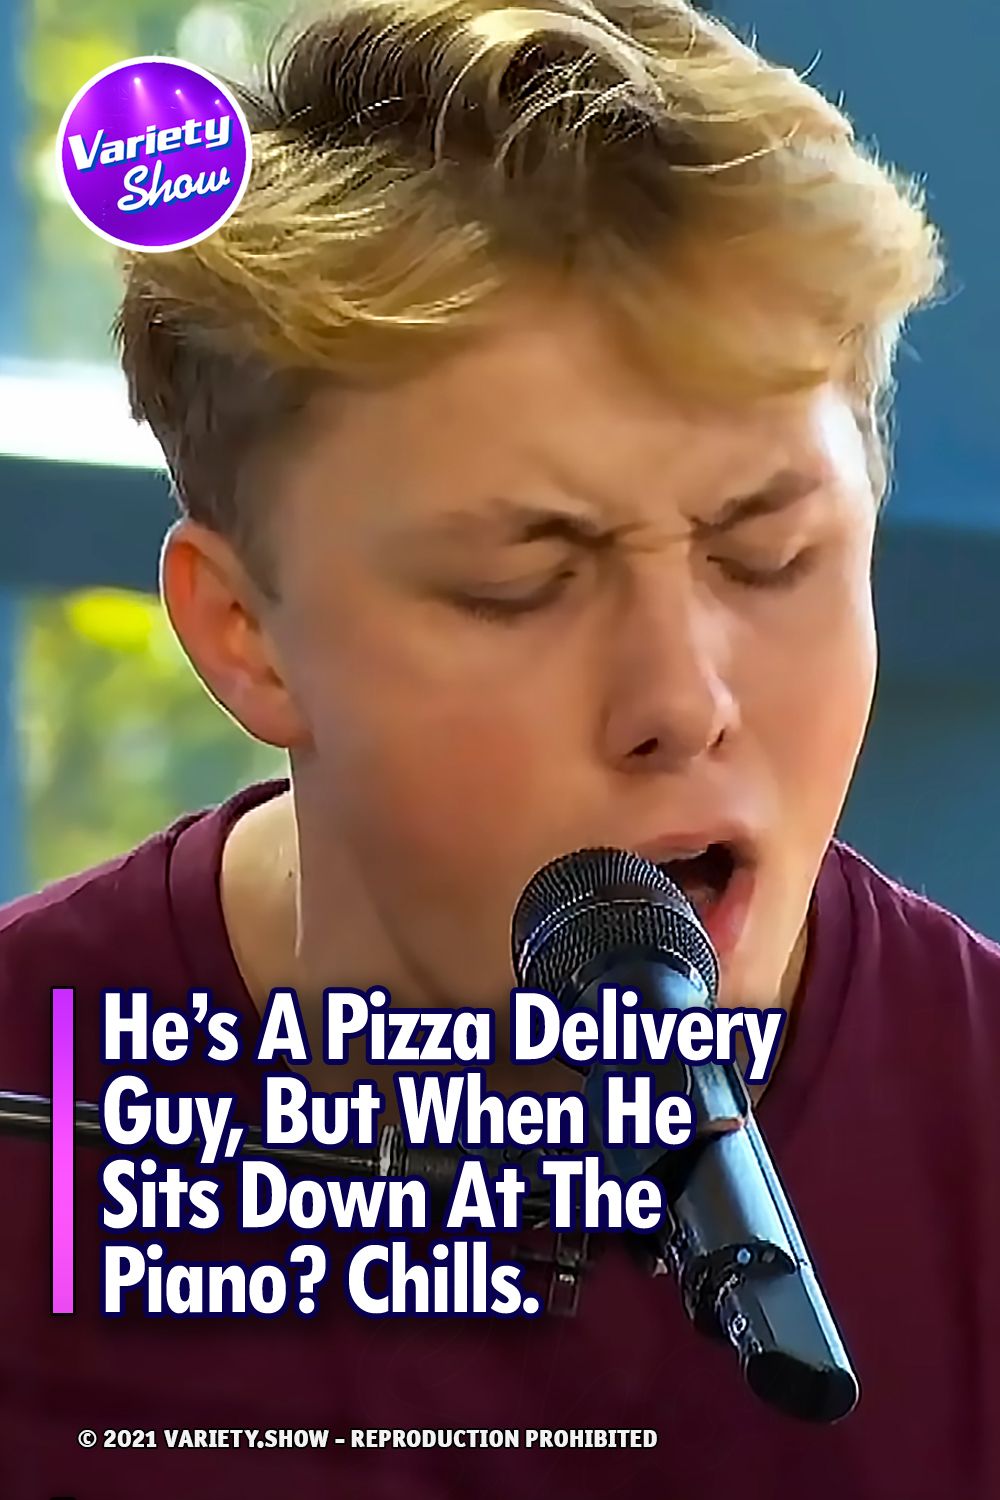 He’s A Pizza Delivery Guy, But When He Sits Down At The Piano? Chills.